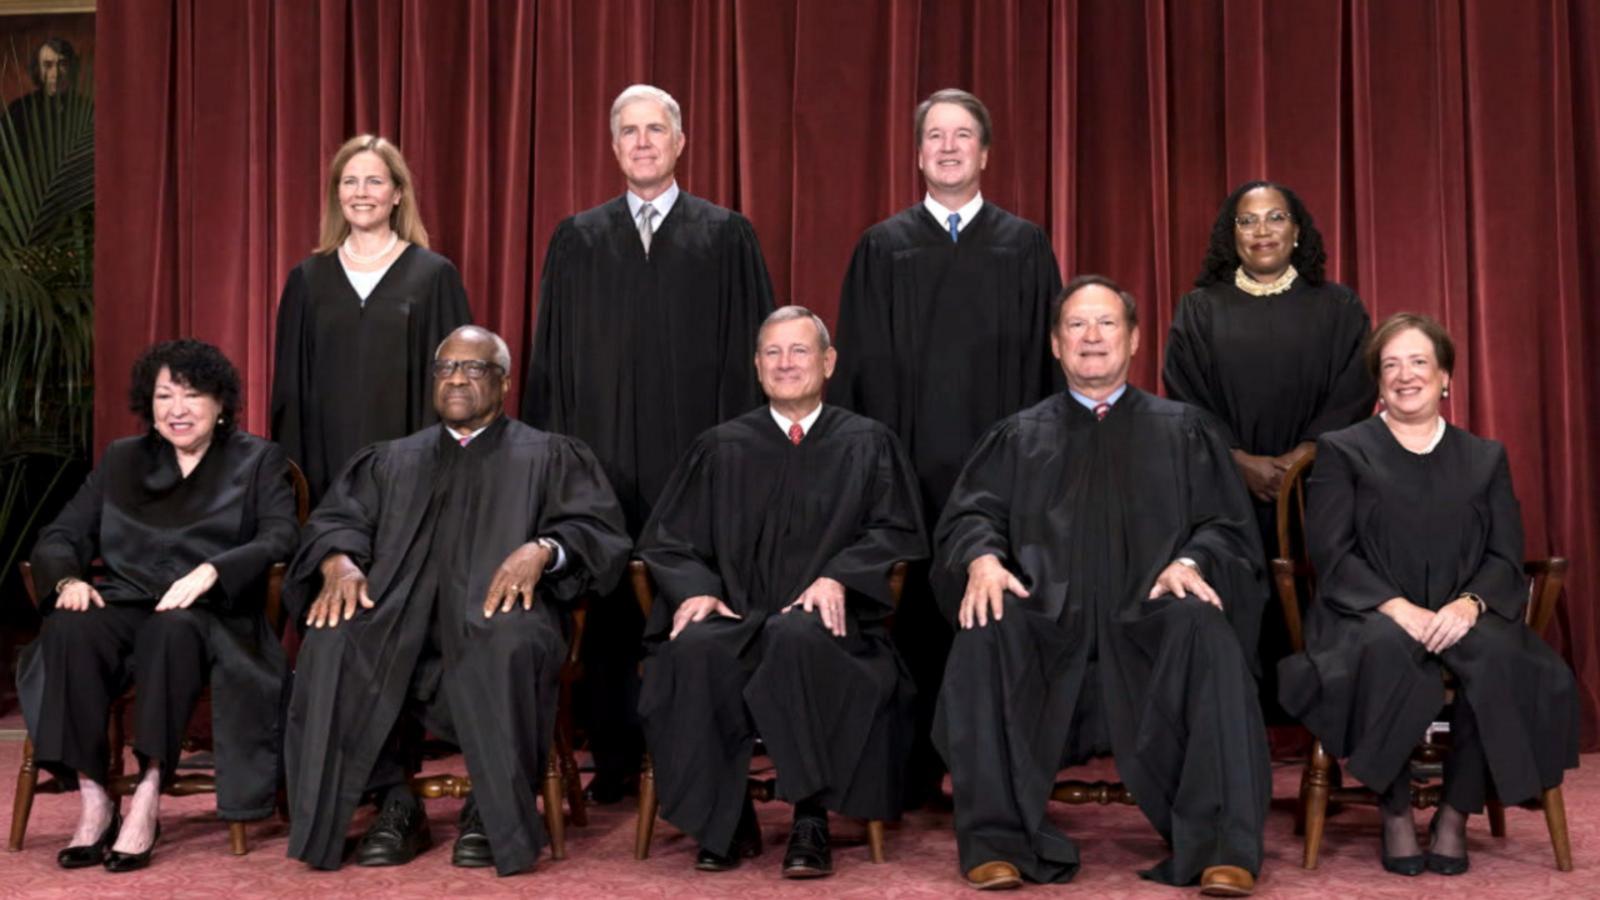 VIDEO: Supreme Court issues new code of conduct for justices after ethics concerns